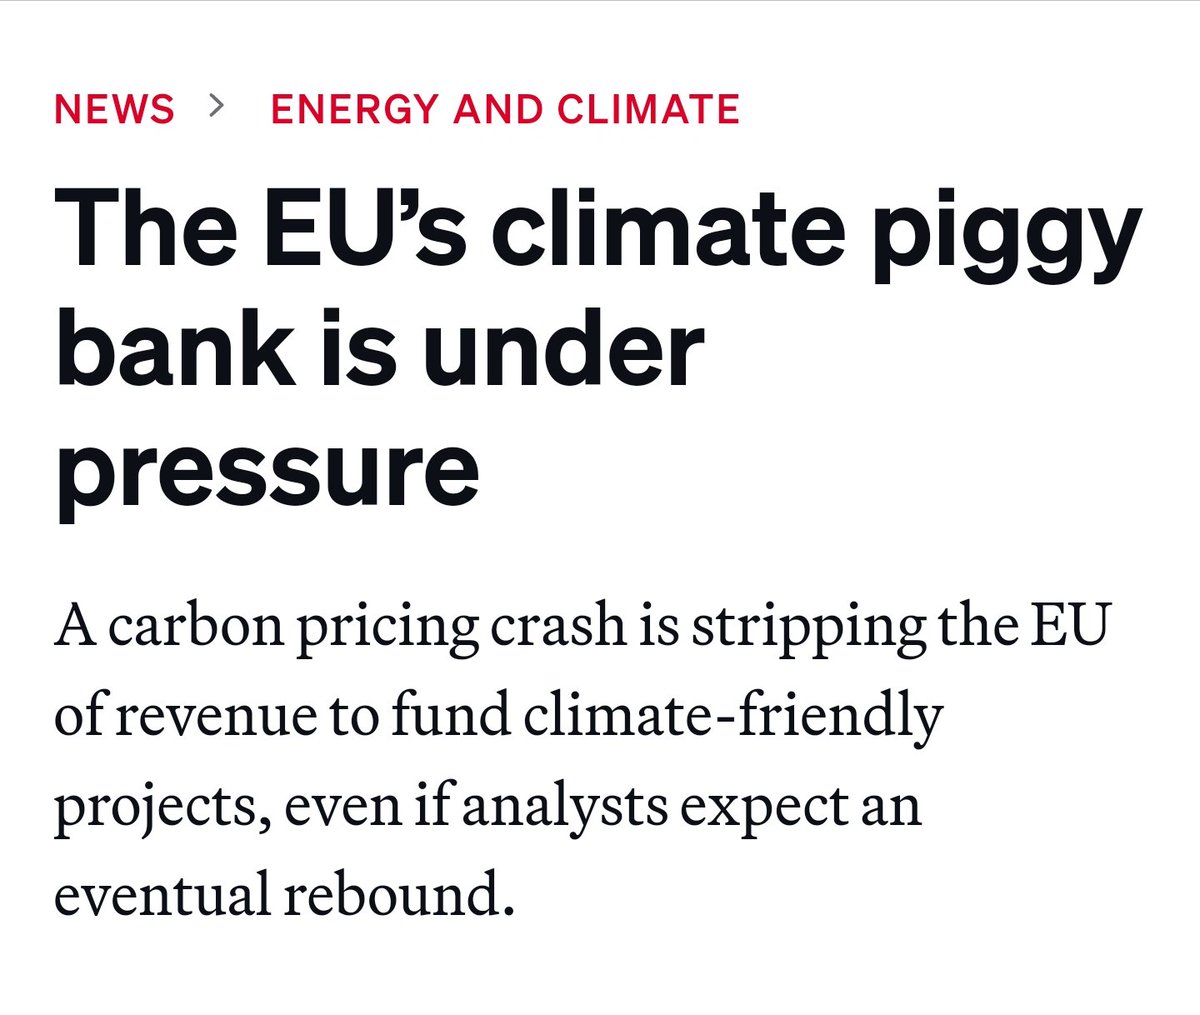 The way I see it - the #EUETS is a victim of its own success.

Indeed, each time the carbon price dips €1, that’s €724 million in lost carbon revenue.

The problem is that the successful high carbon price over the last years has been tempting decision-makers to tap into it in